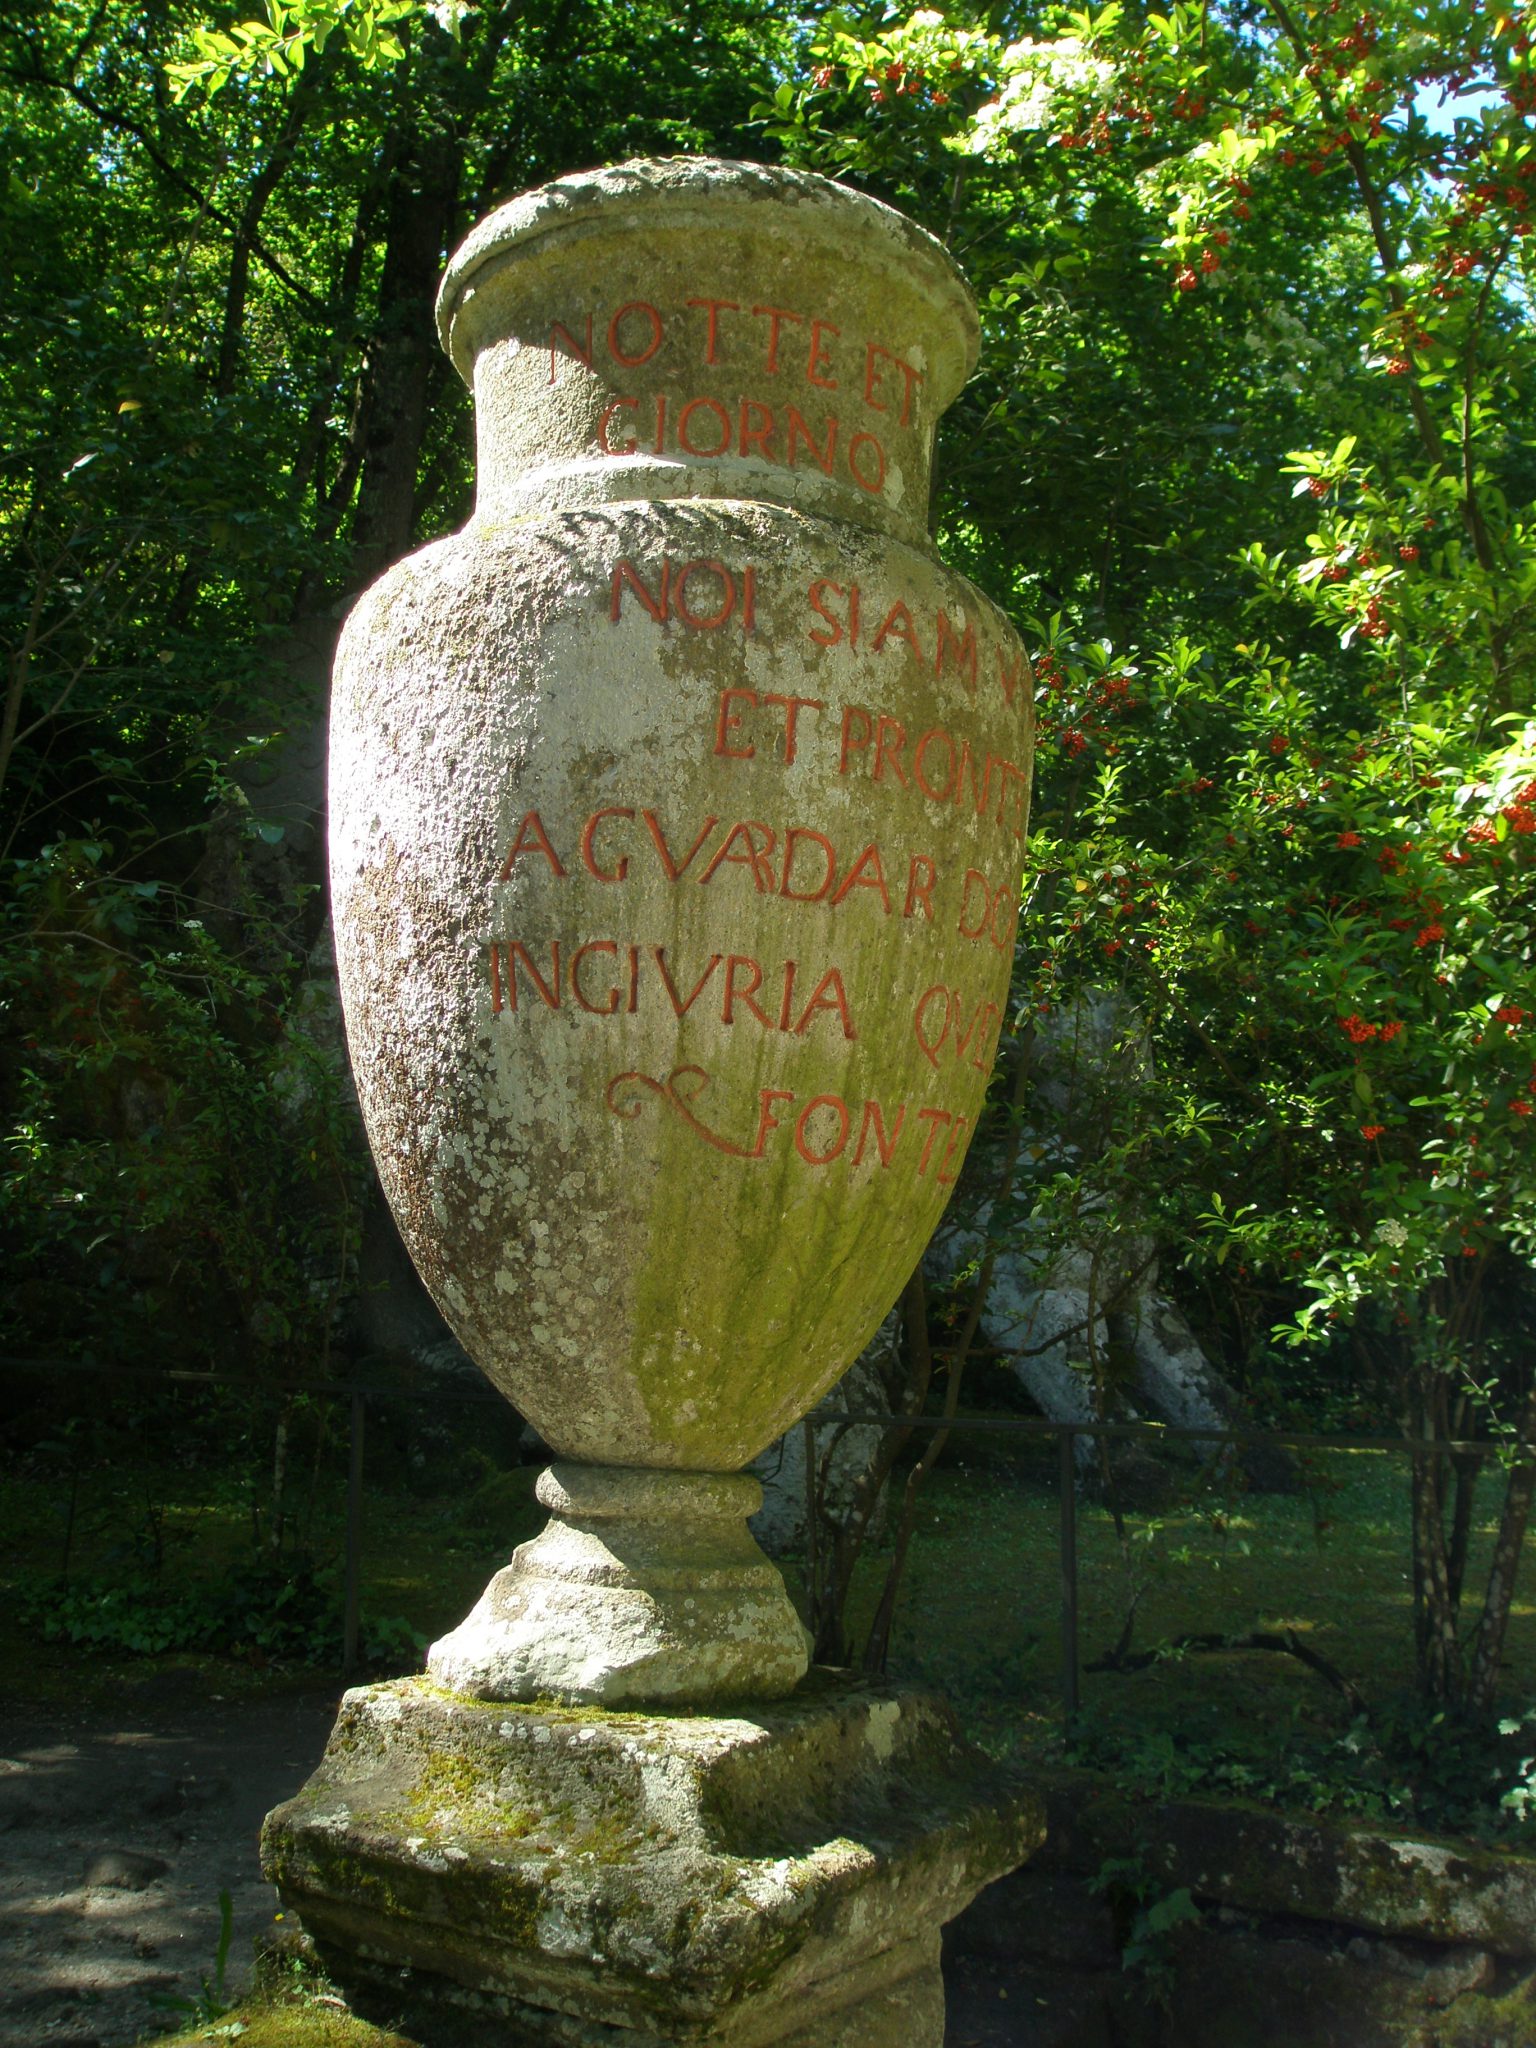 Every Giant Vase is inscribed with a message from Vicino. This one says: "Night and Day we are vigilant and ready to protect this fountain from any harm." No evidence survives of fountains in this part of Sacro Bosco. I'm trying to imagine what the gardens were like, when every corner was filled with the sounds of splashing water.